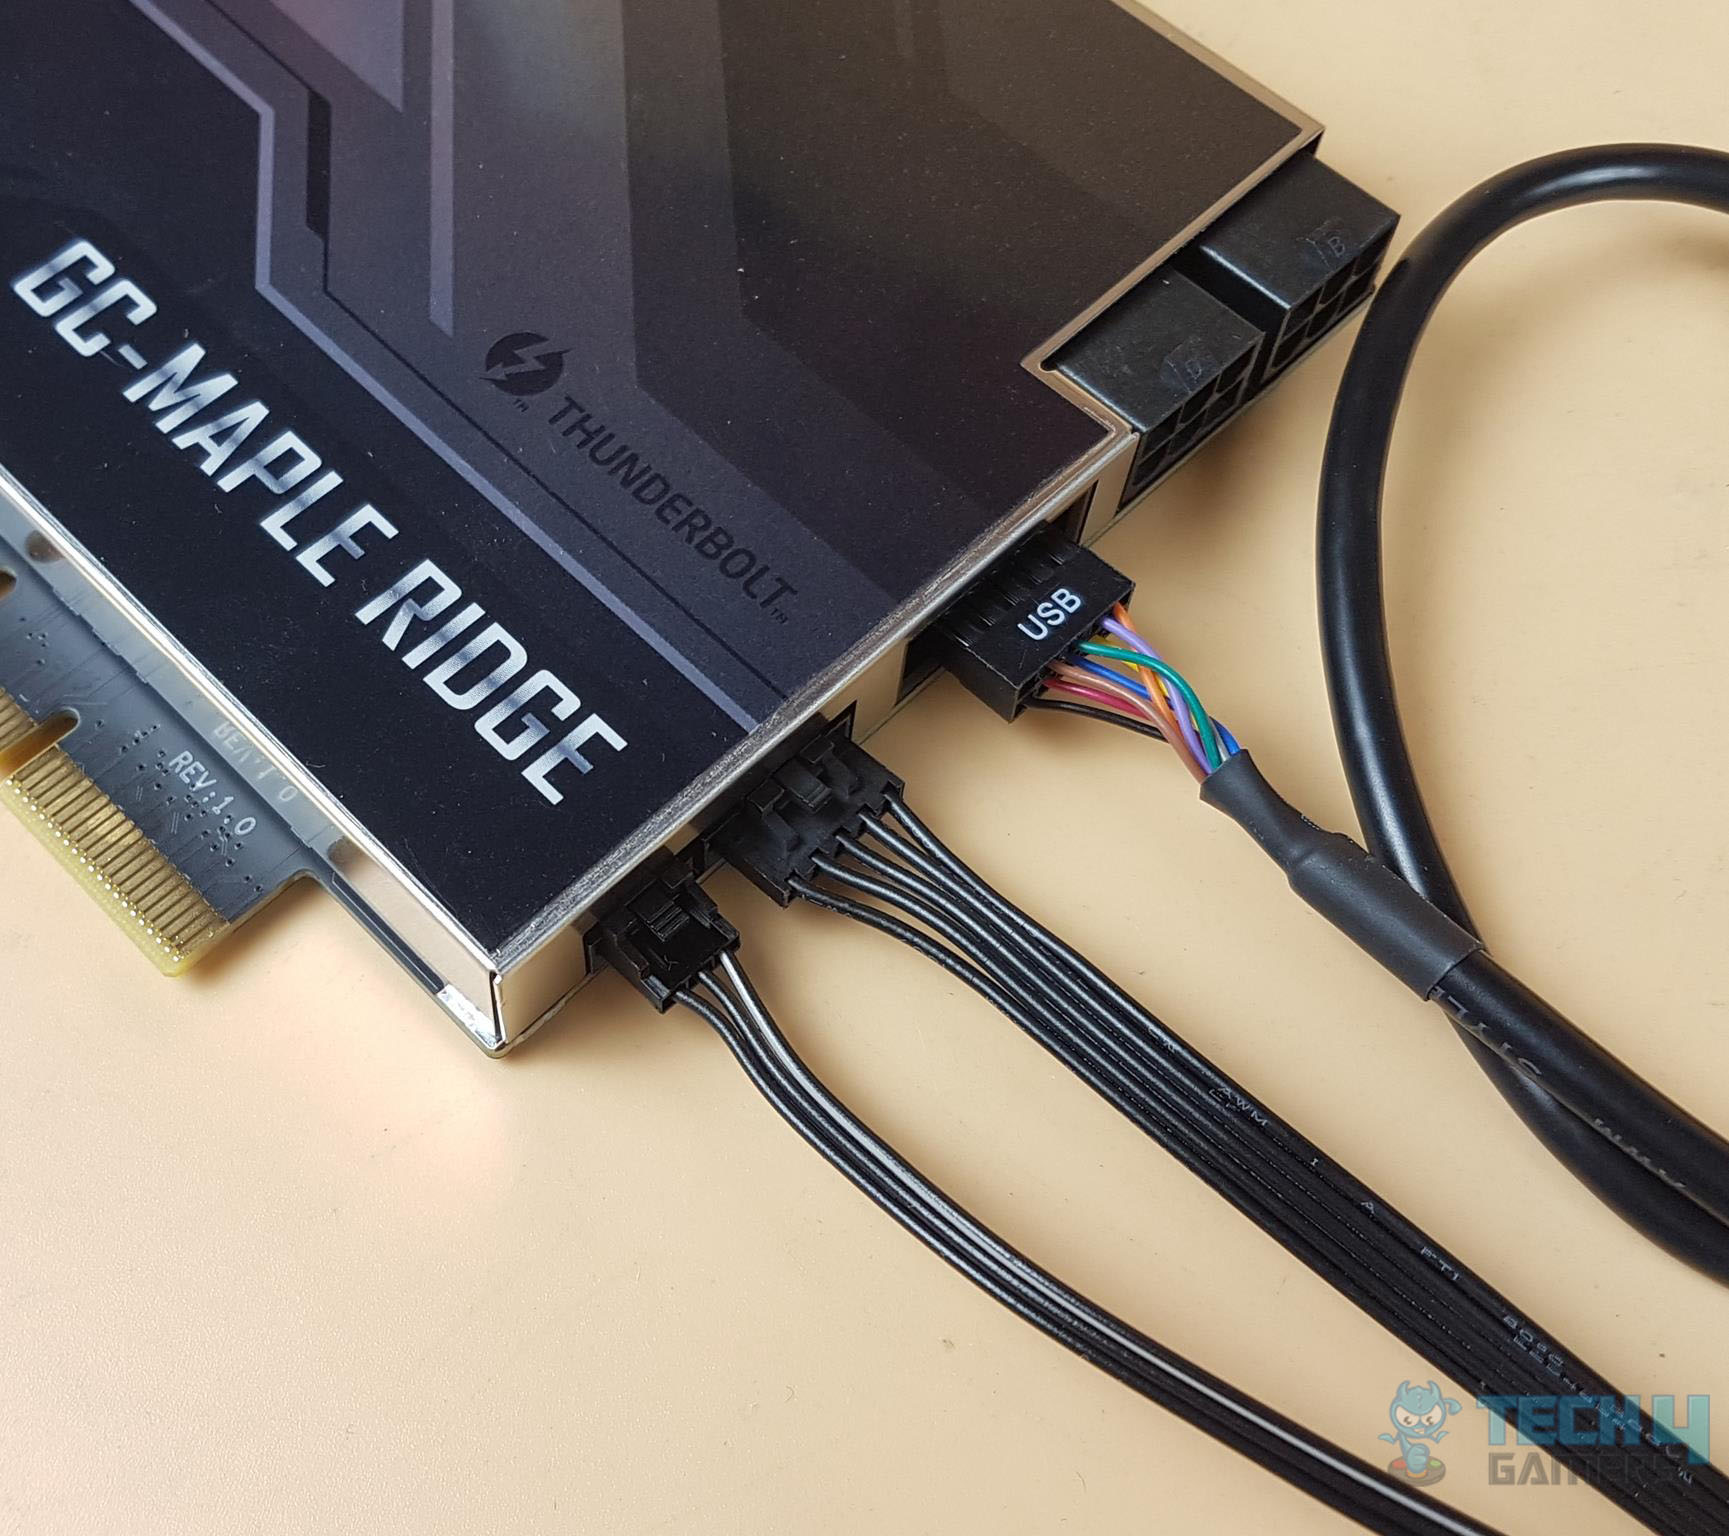 GIGABYTE GC-Maple Ridge Add-in Card Review - Tech4Gamers